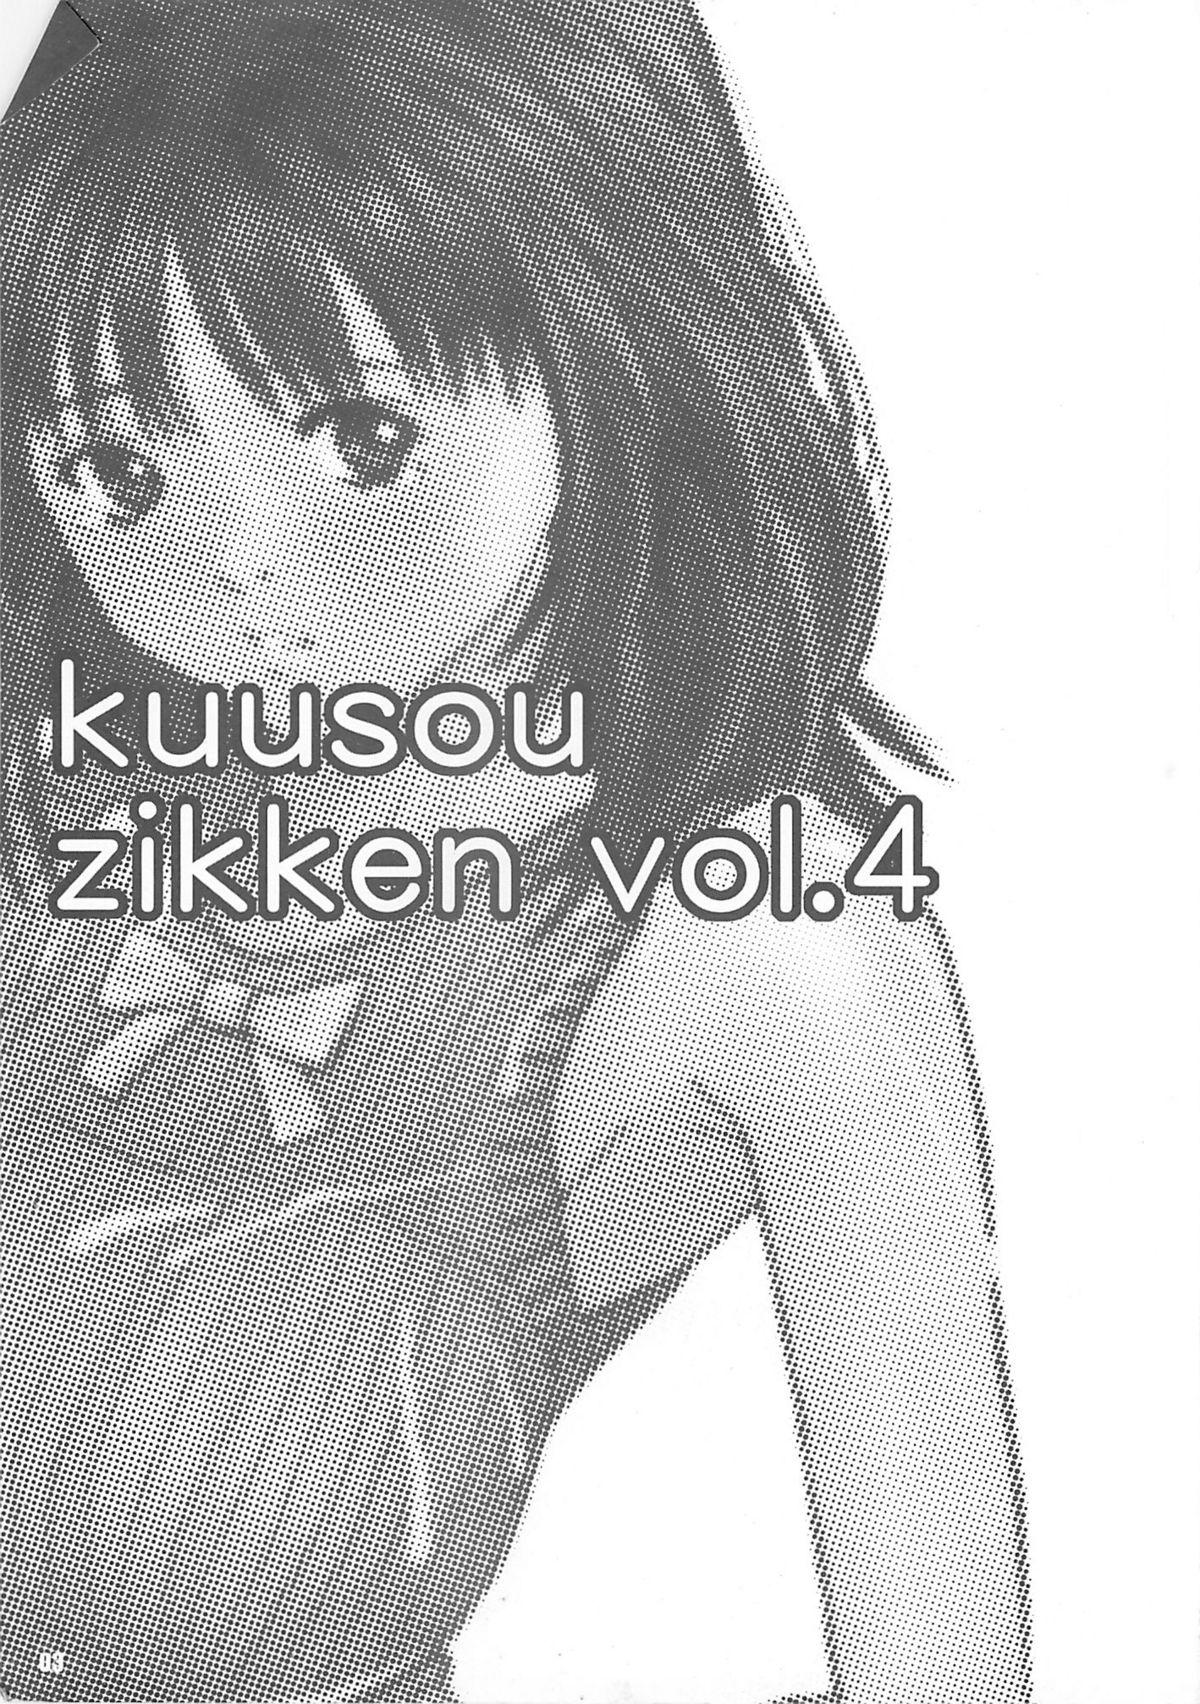 Best Blow Job Kuusou Zikken Vol. 4 - Is Pussy To Mouth - Page 3